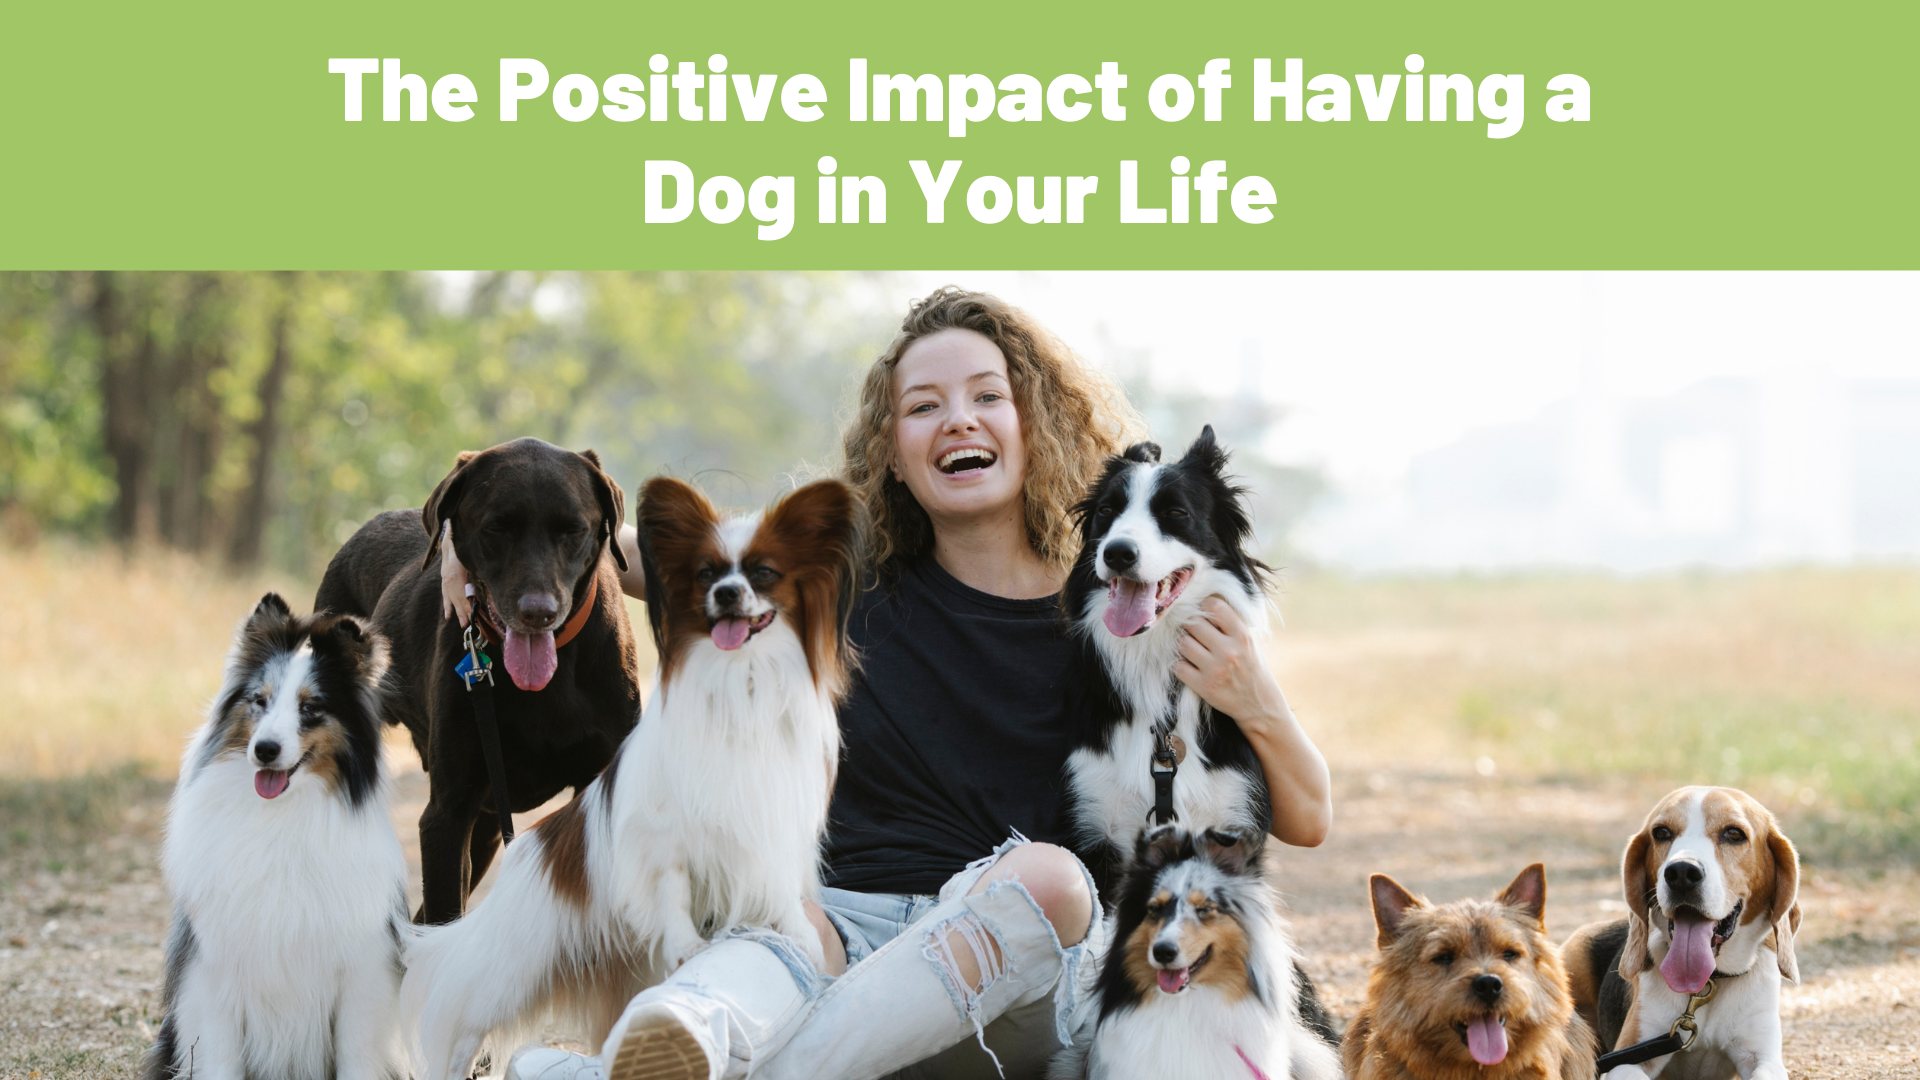 Furry Companions: The Positive Impact of Having a Dog in Your Life - Raw Origins - The Raw Dog Food Company